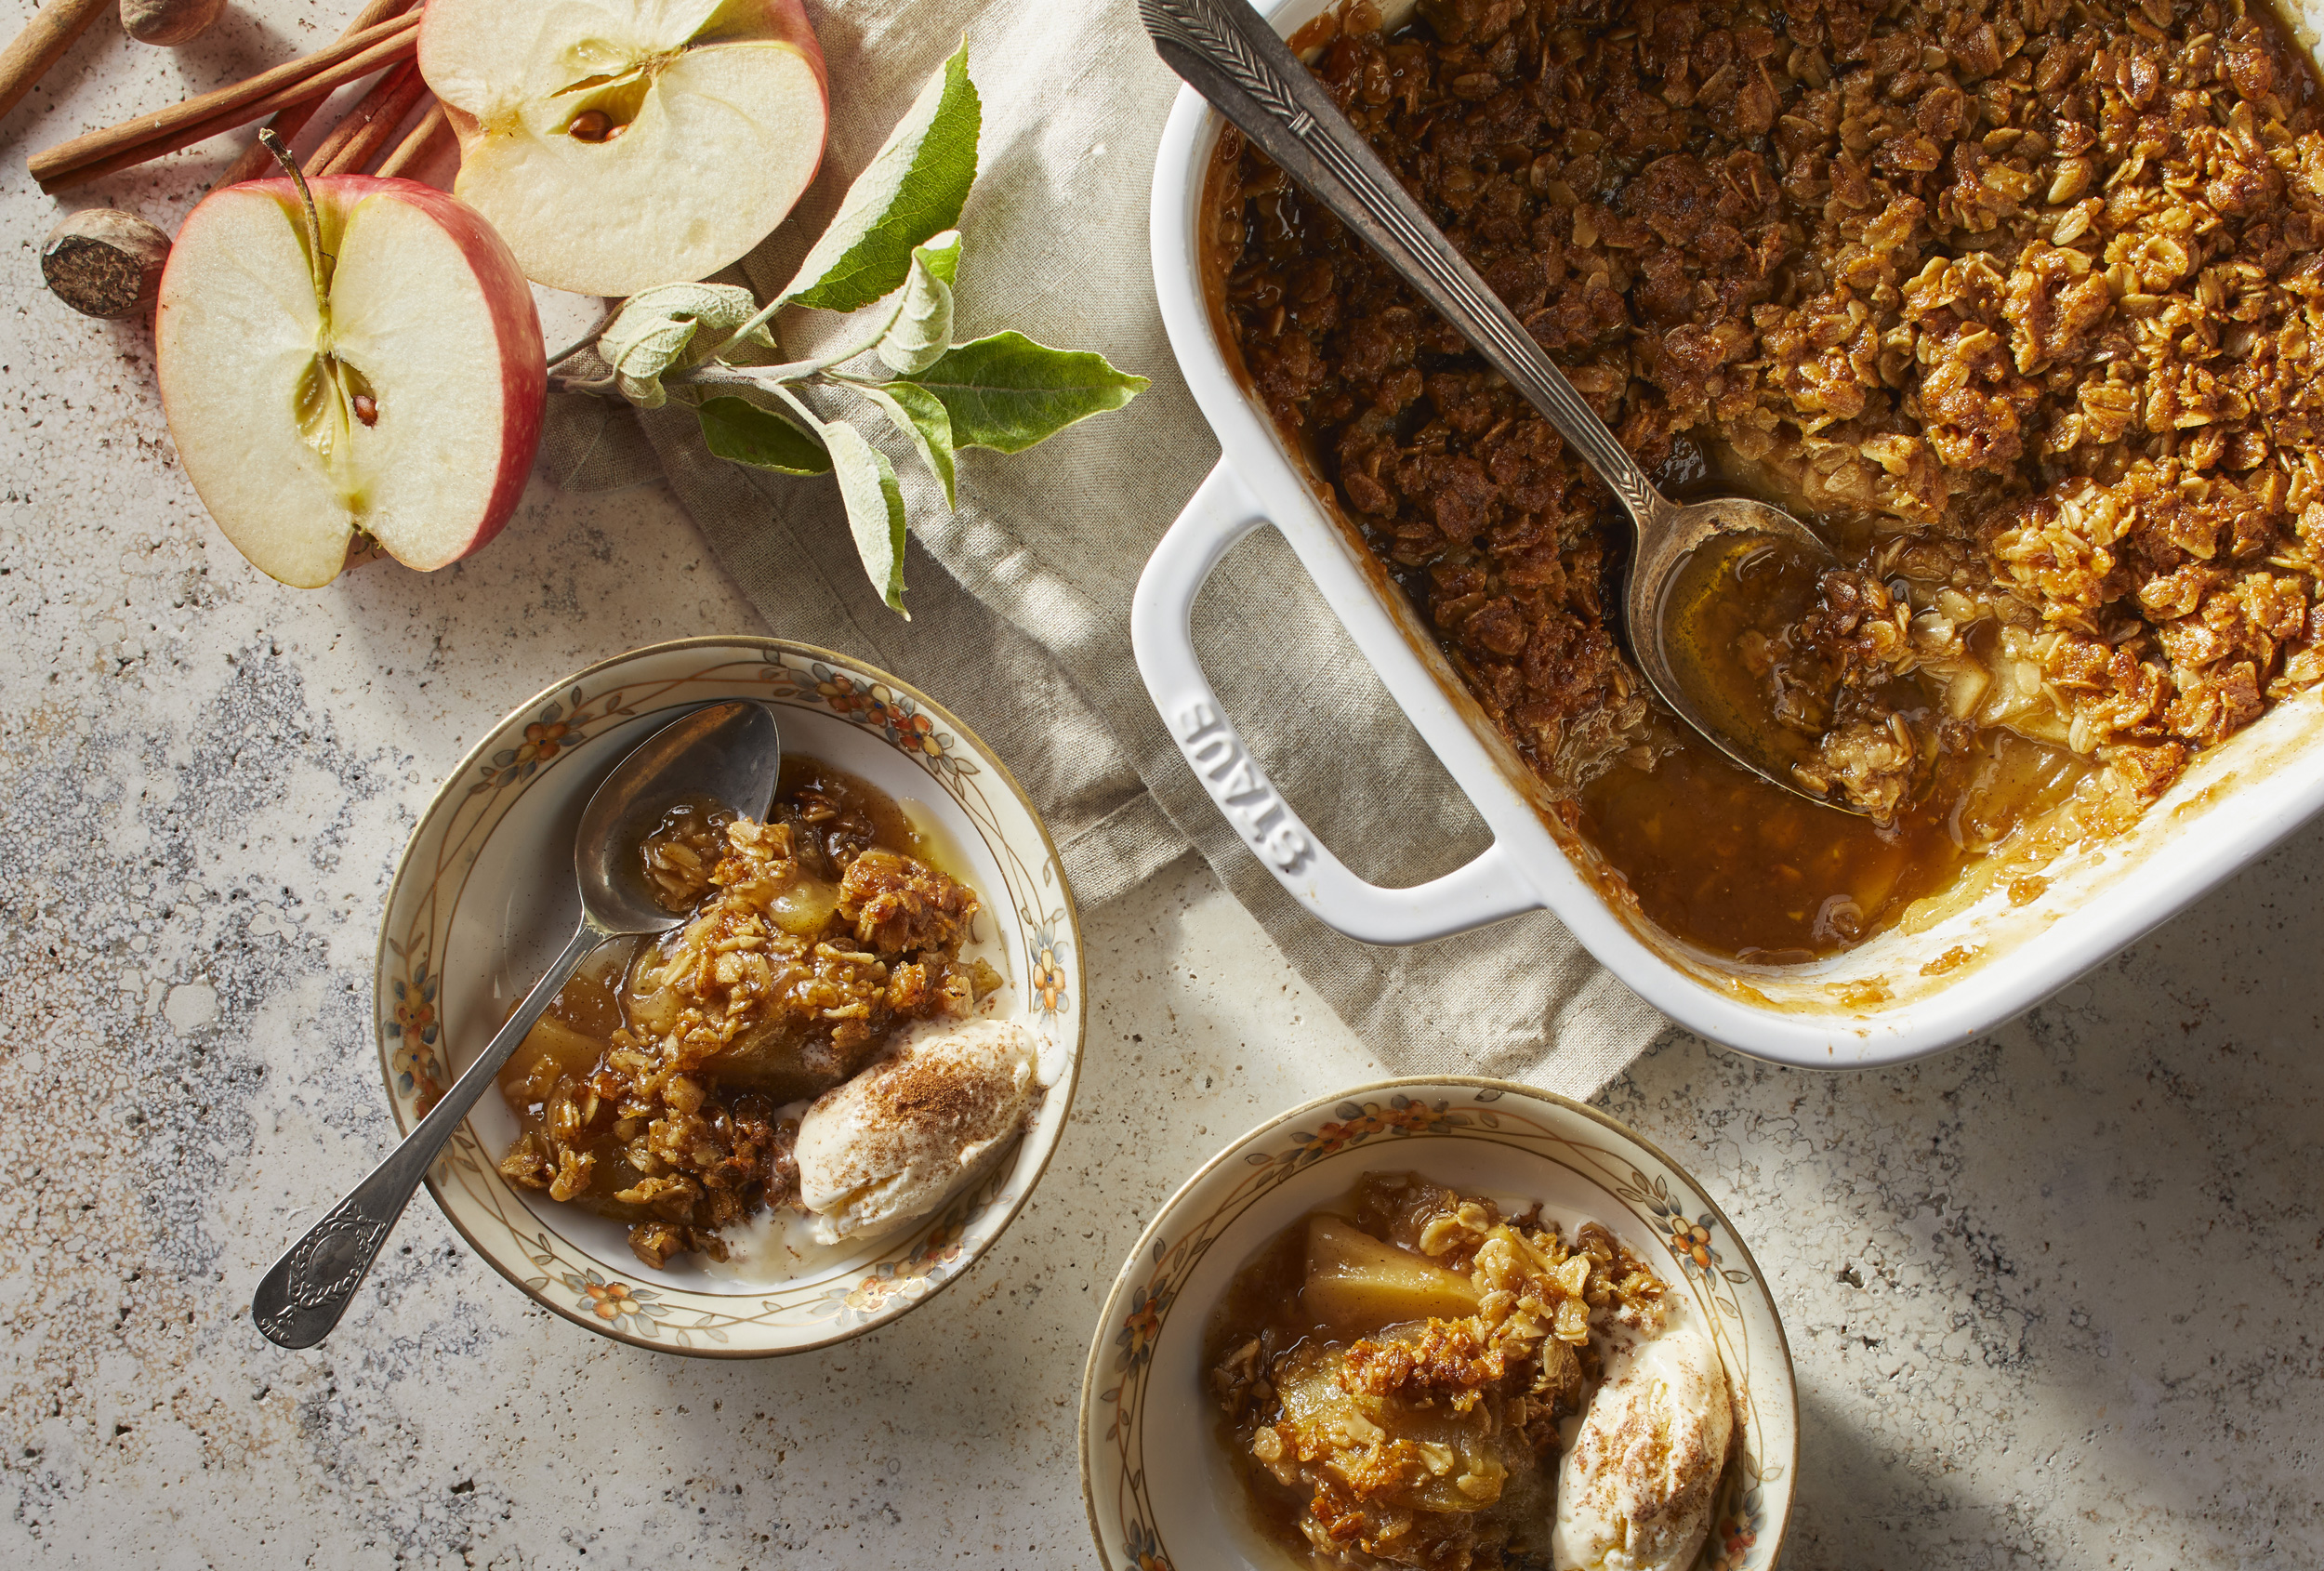 Apple Crisp photo by Chris Kessler Photography.  Chris Kessler is a freelance Photographer based in Milwaukee Wisconsin. Specializing in Food photography and portraiture.